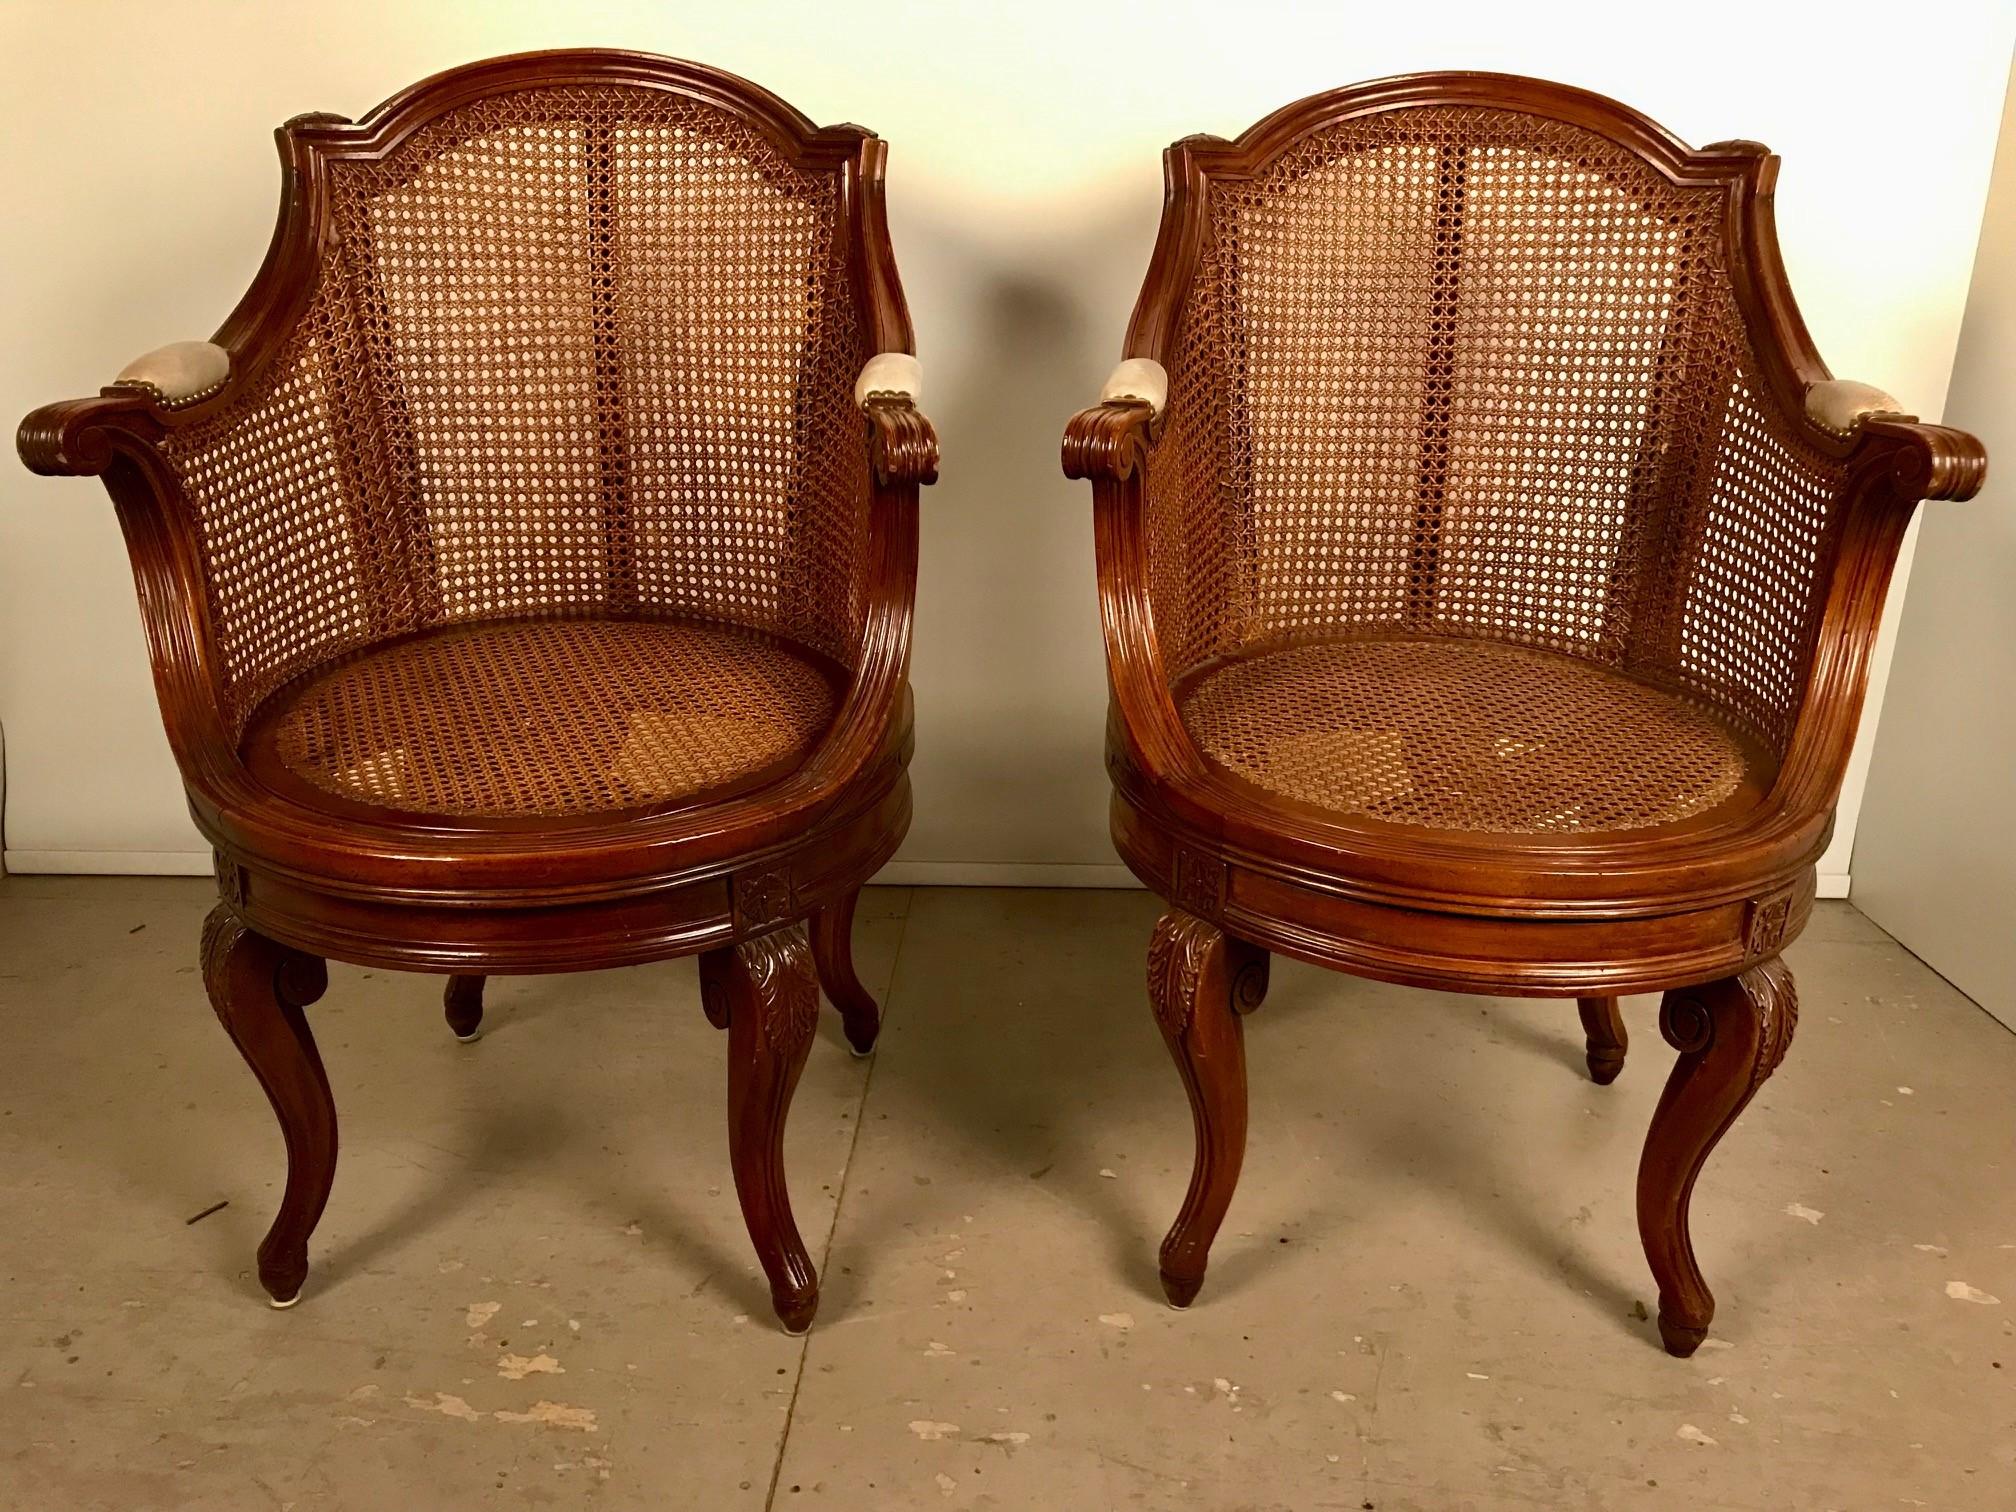 A Pair of French Louis XV style walnut swivel armchairs, the caned seats and back are in excellent condition. These are a wonderful and quite comfortable pair, with a curved back back paterae and leather padded over carved arms, supported on French